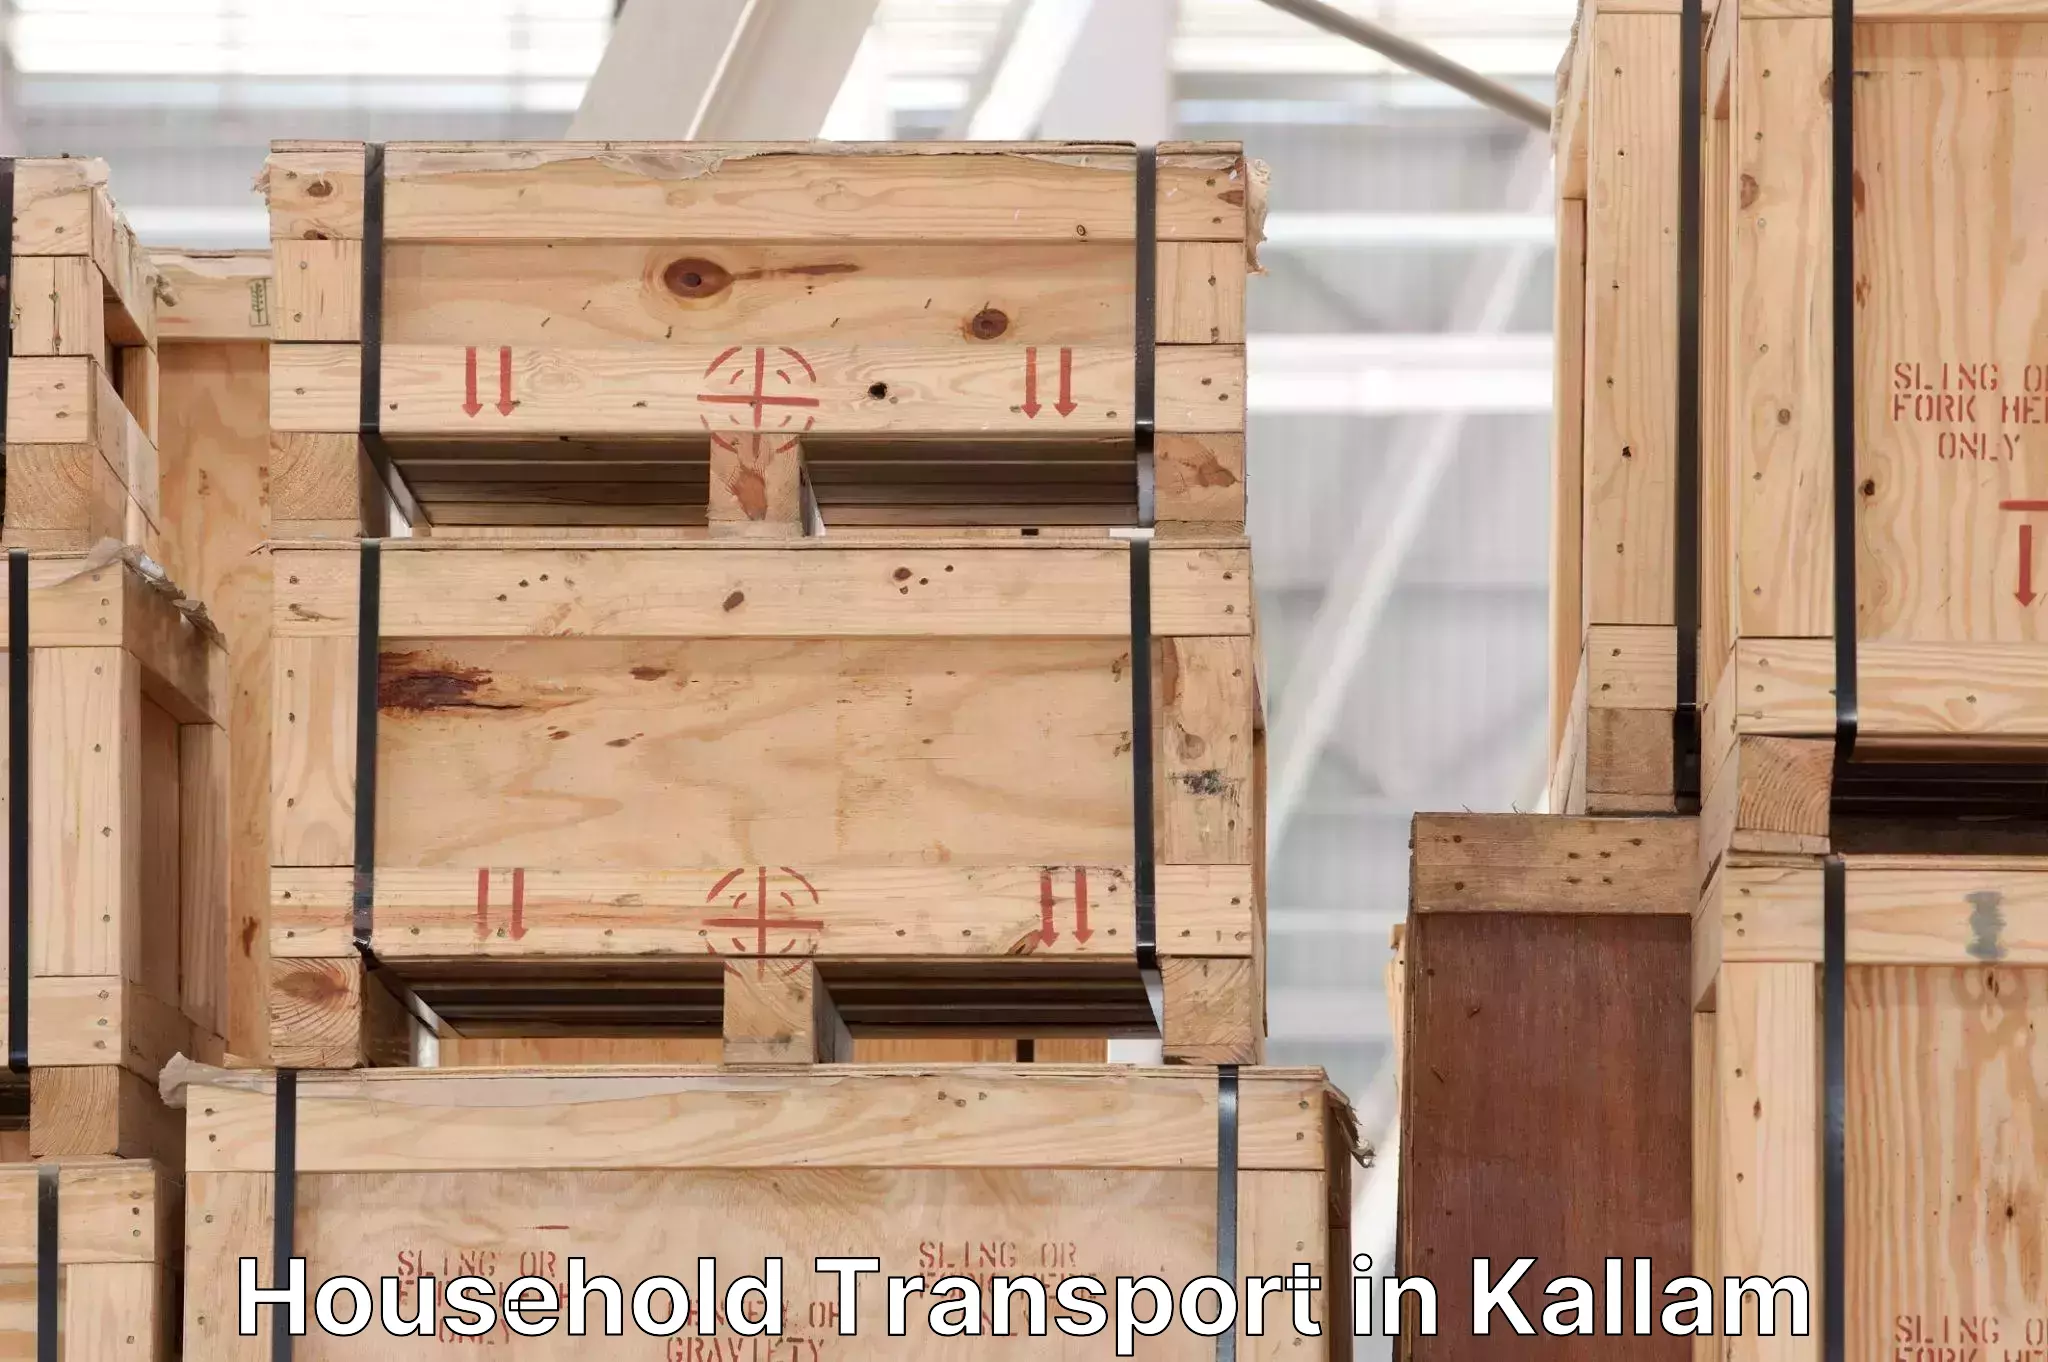 Household transport services in Kallam